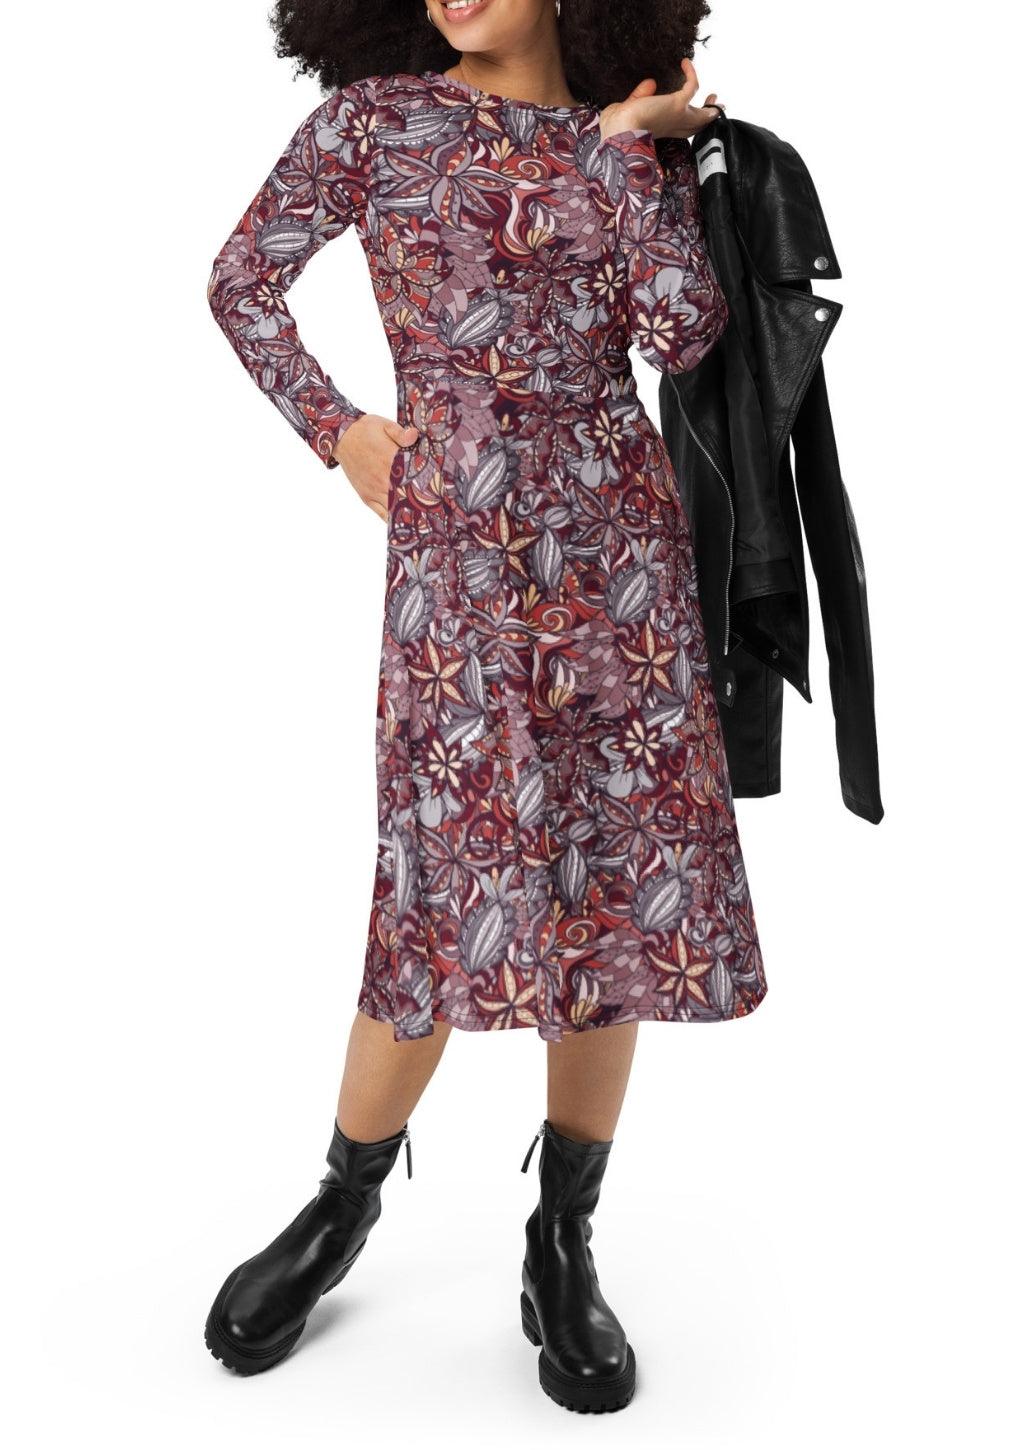 Biei Long Sleeve Midi Fit & Flare Pocket Dress - Dark Abstract Floral Print - Retro All Over Print Paisley Floral Abstract